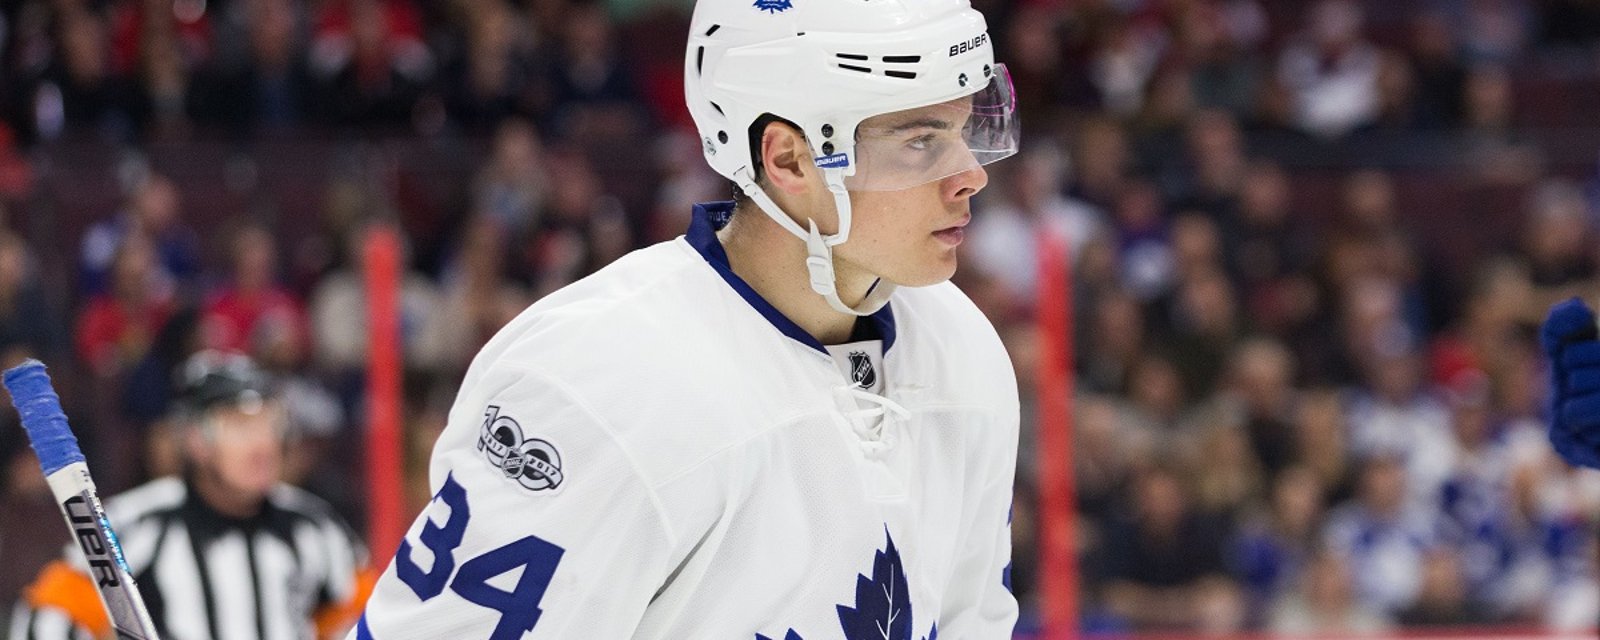 Auston Matthews reveals the story behind his number 34.